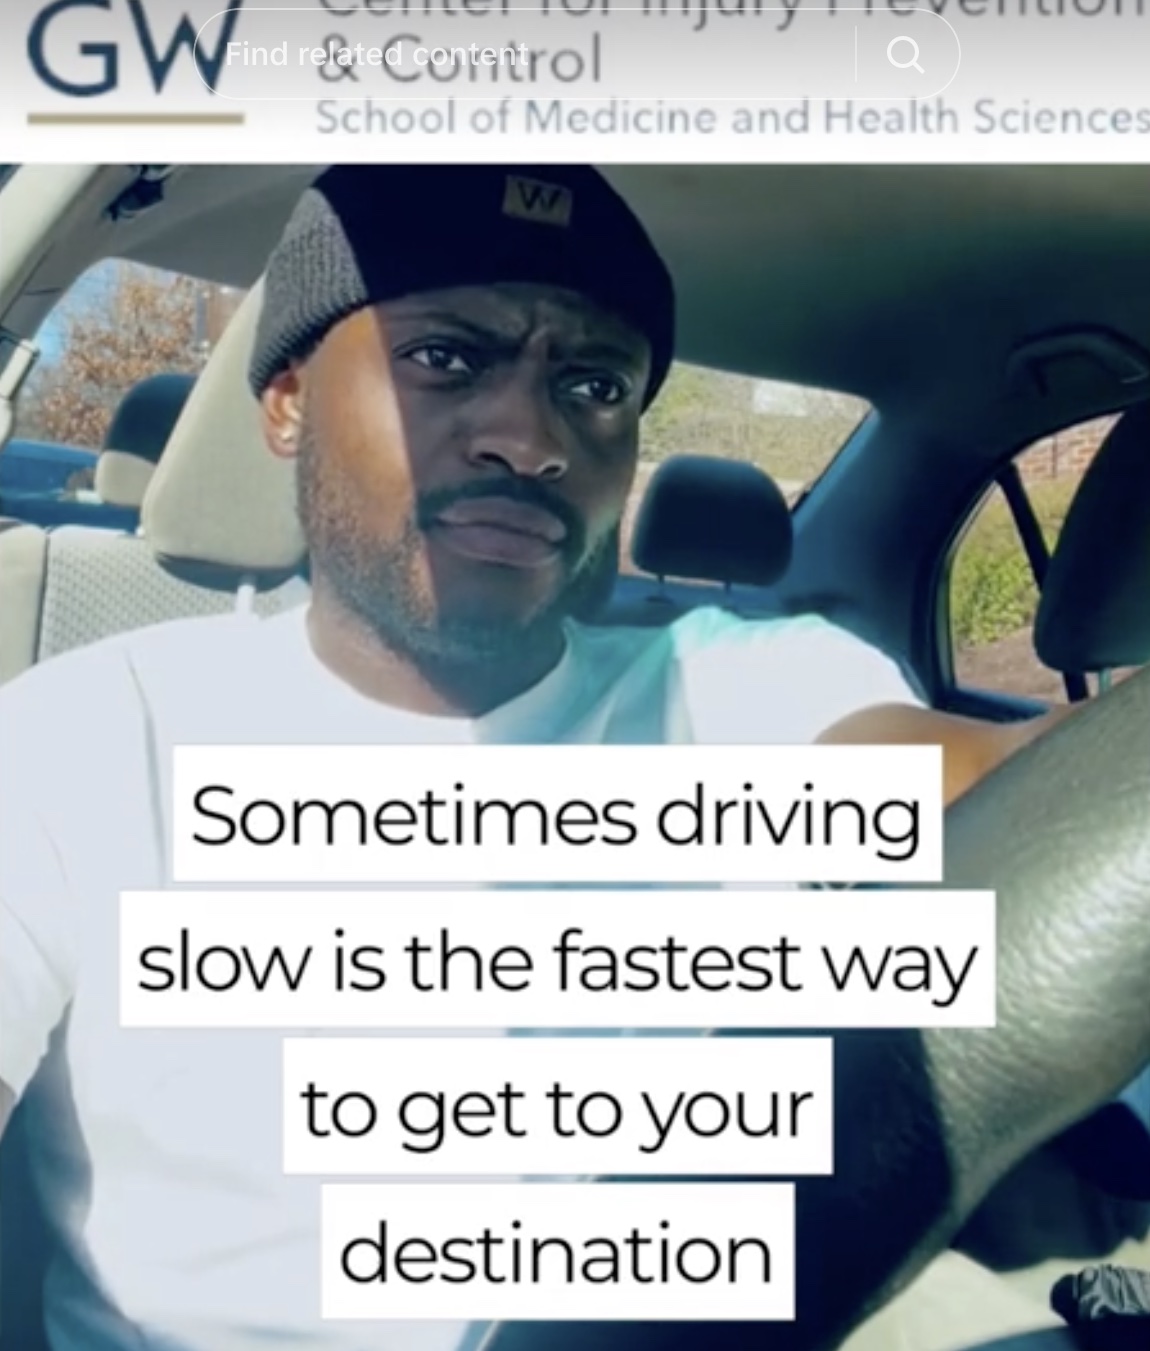 GW Center for Injury  Prevention & Control hopes to convince young men and other drivers to slow down